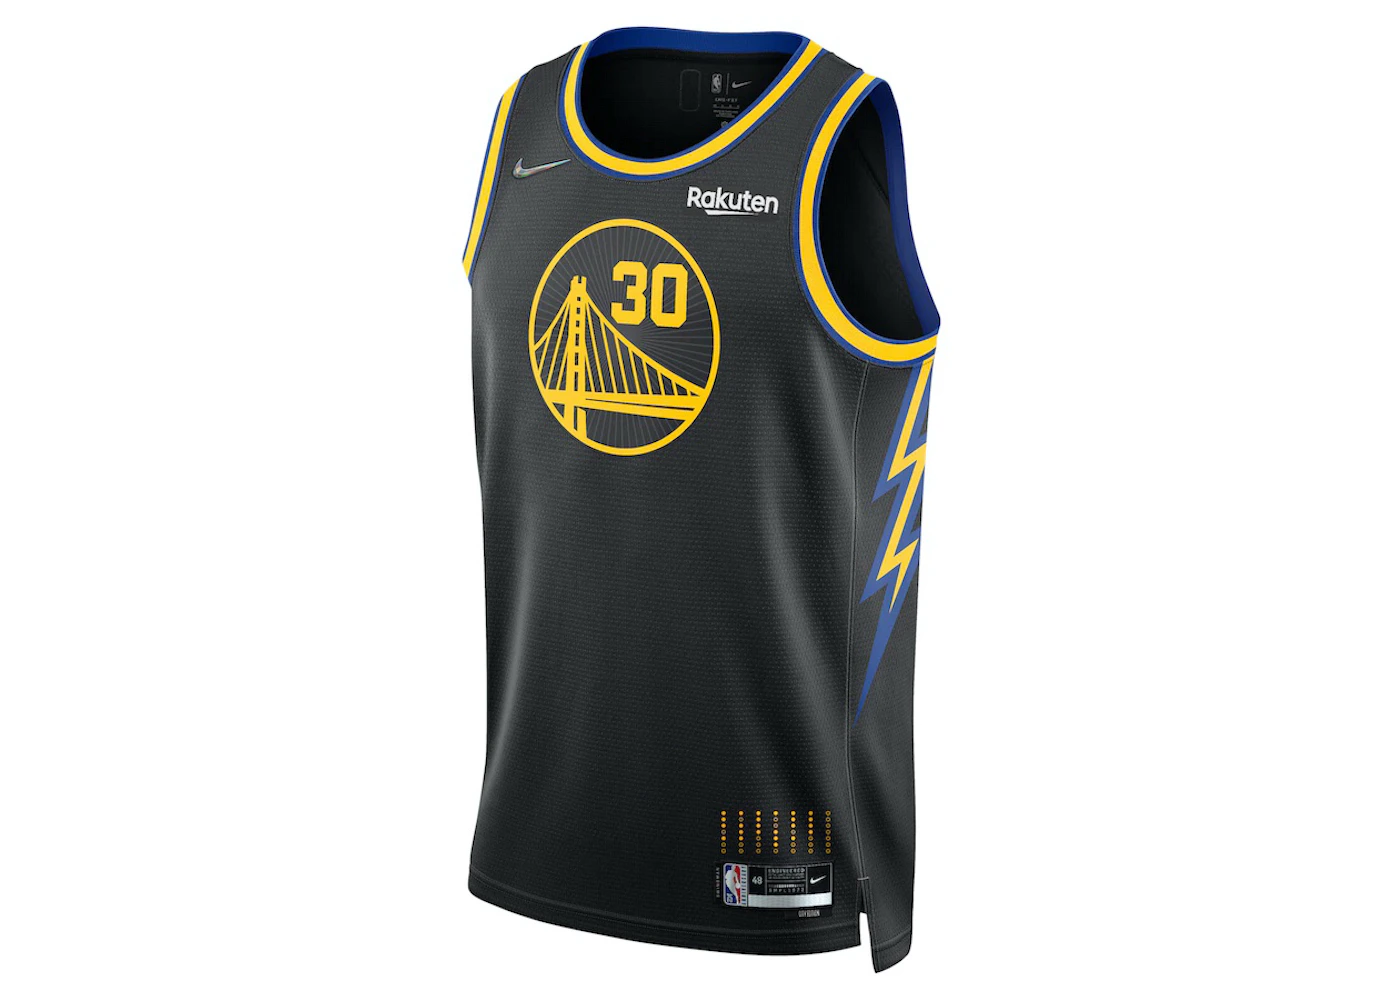 gsw the town jersey